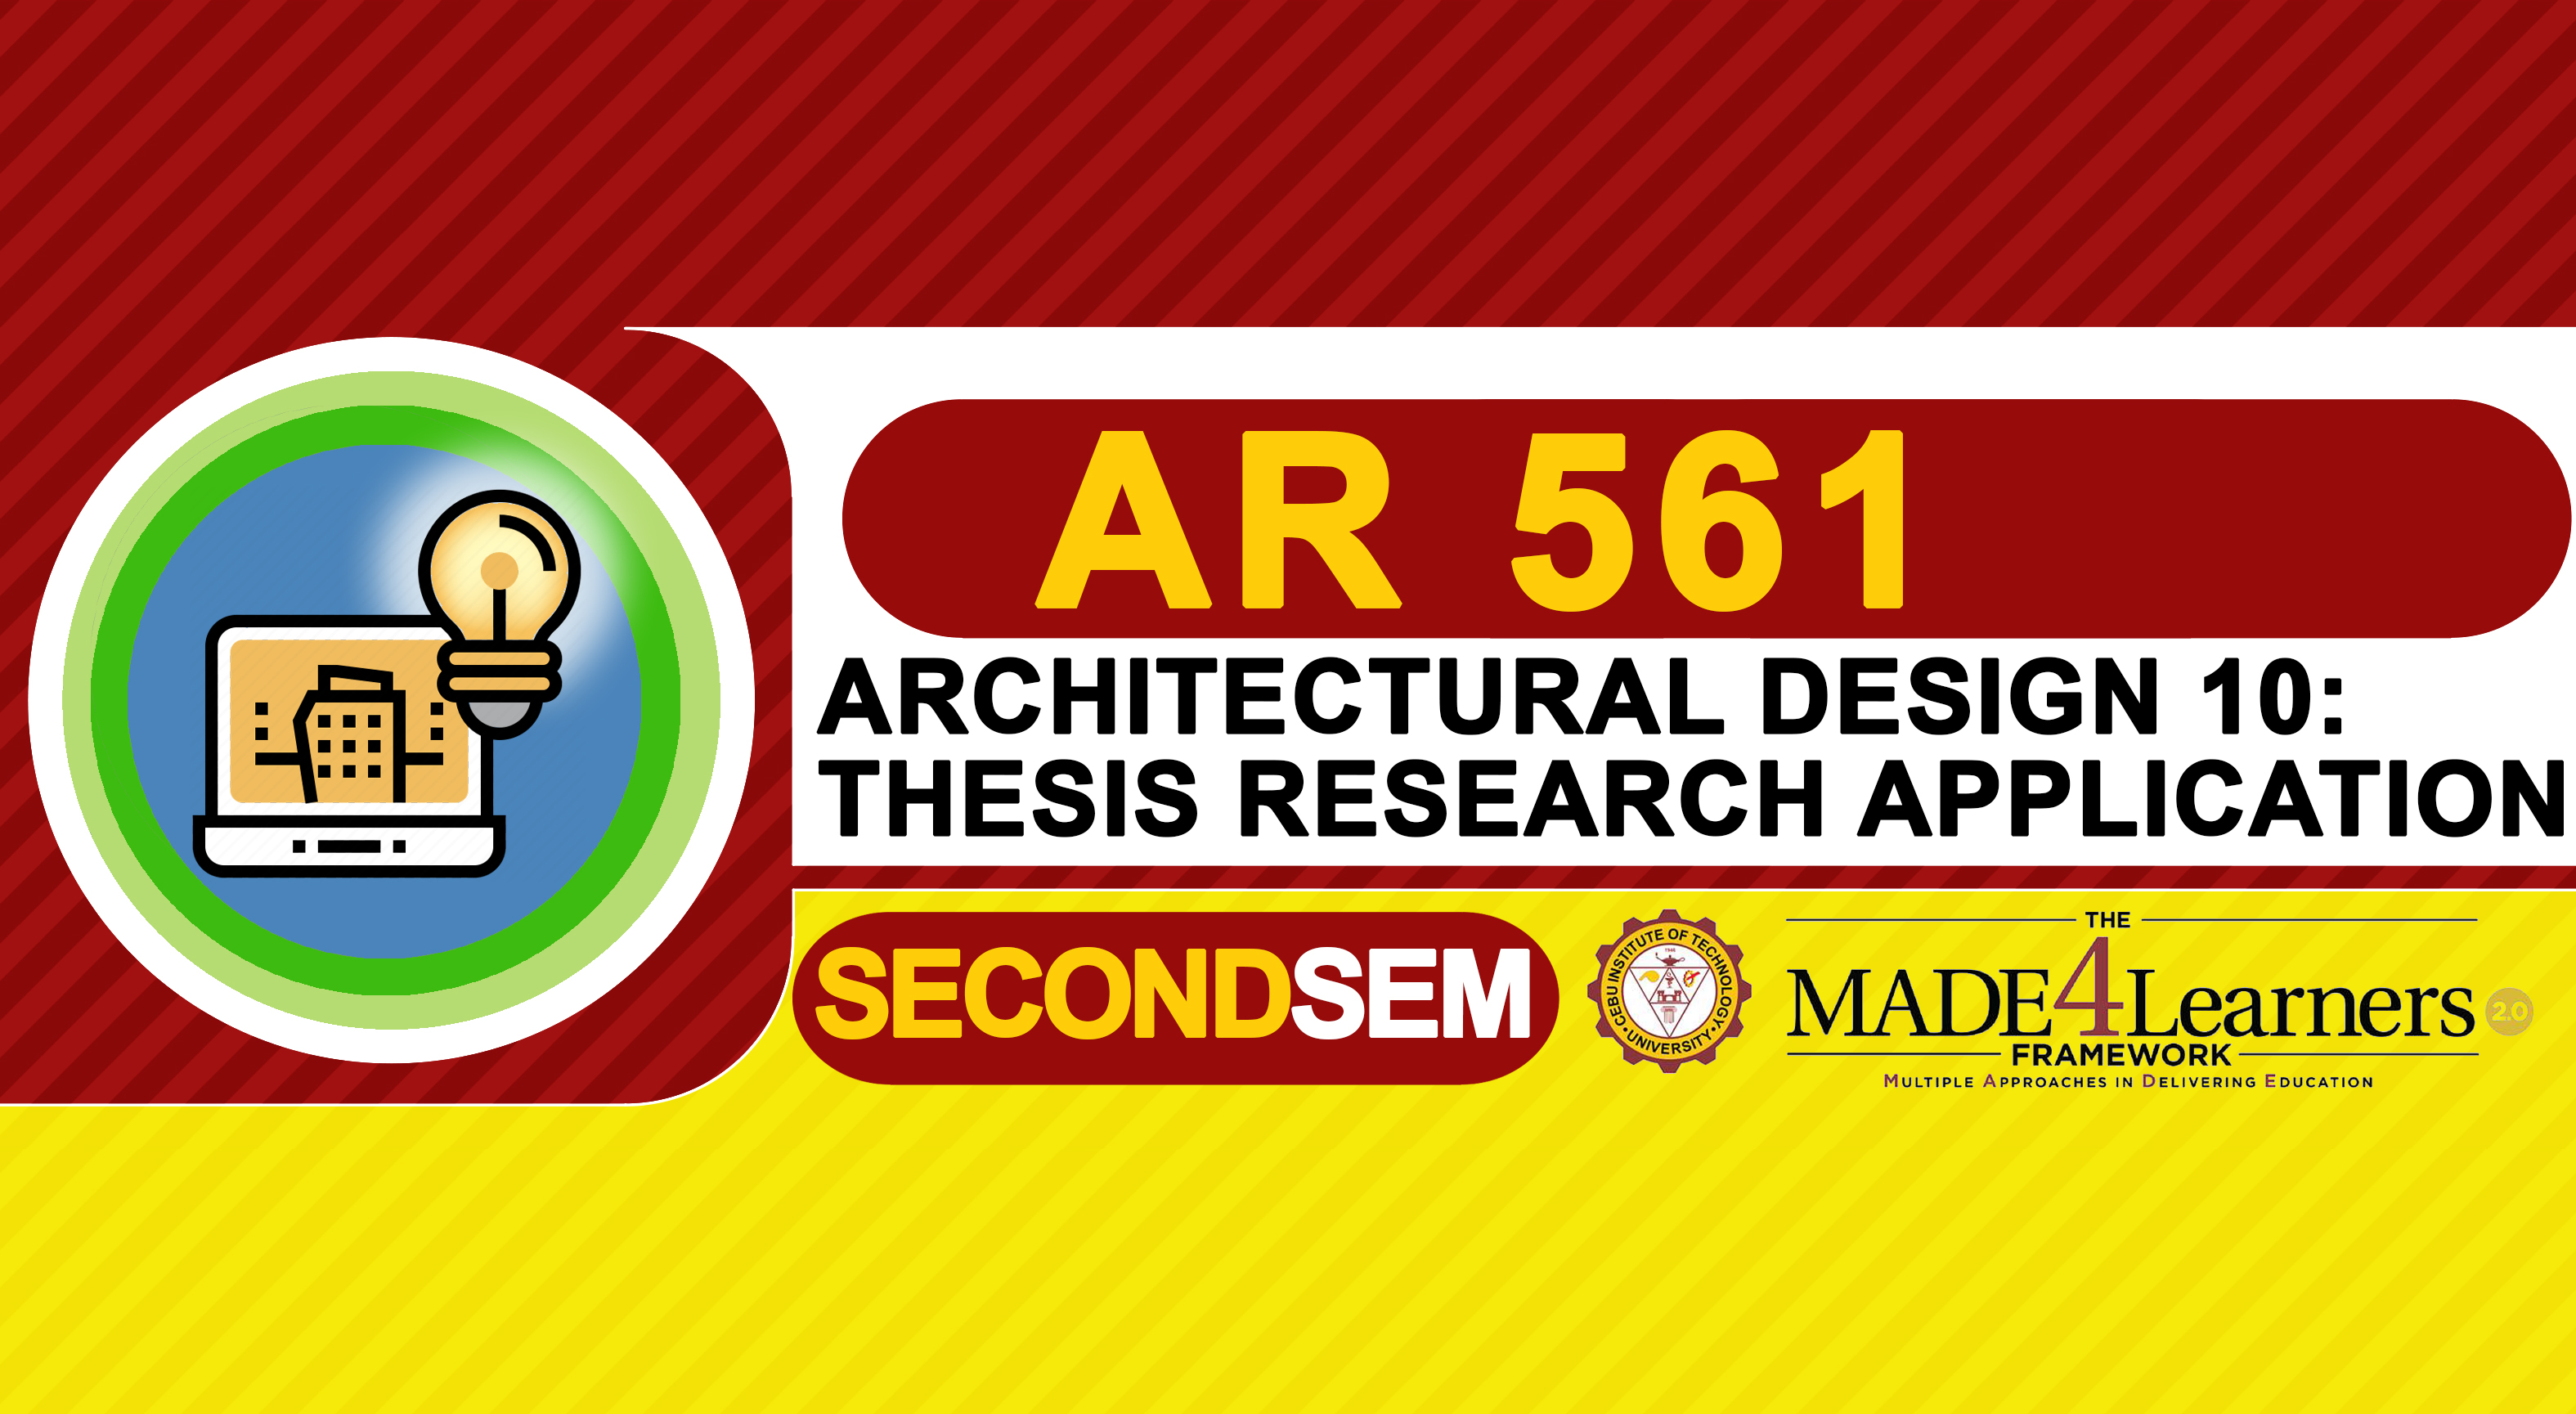 AR561: ARCHITECTURAL DESIGN 10 ; Thesis Research Application